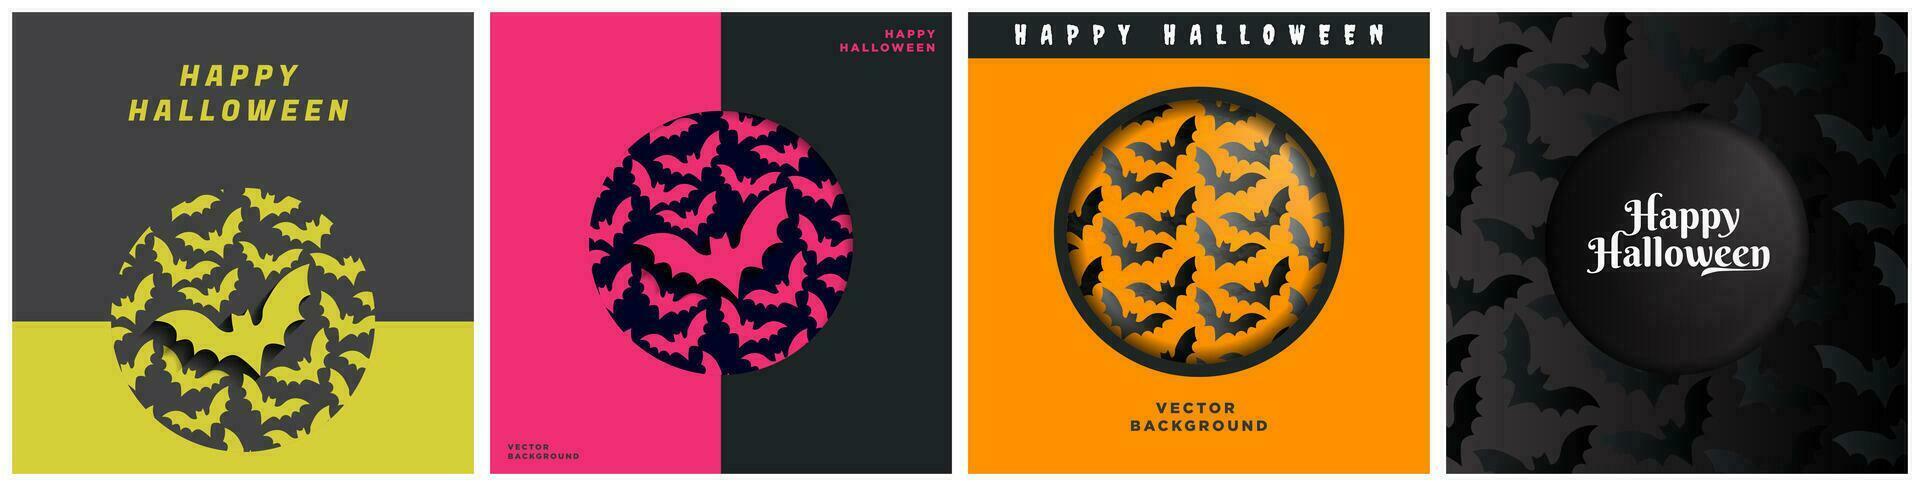 Set of Geometric Halloween Bat themed cover album card templates in dark and orange colors, card poster layouts for Halloween. Bat patterned designs.  Vector Illustrations.